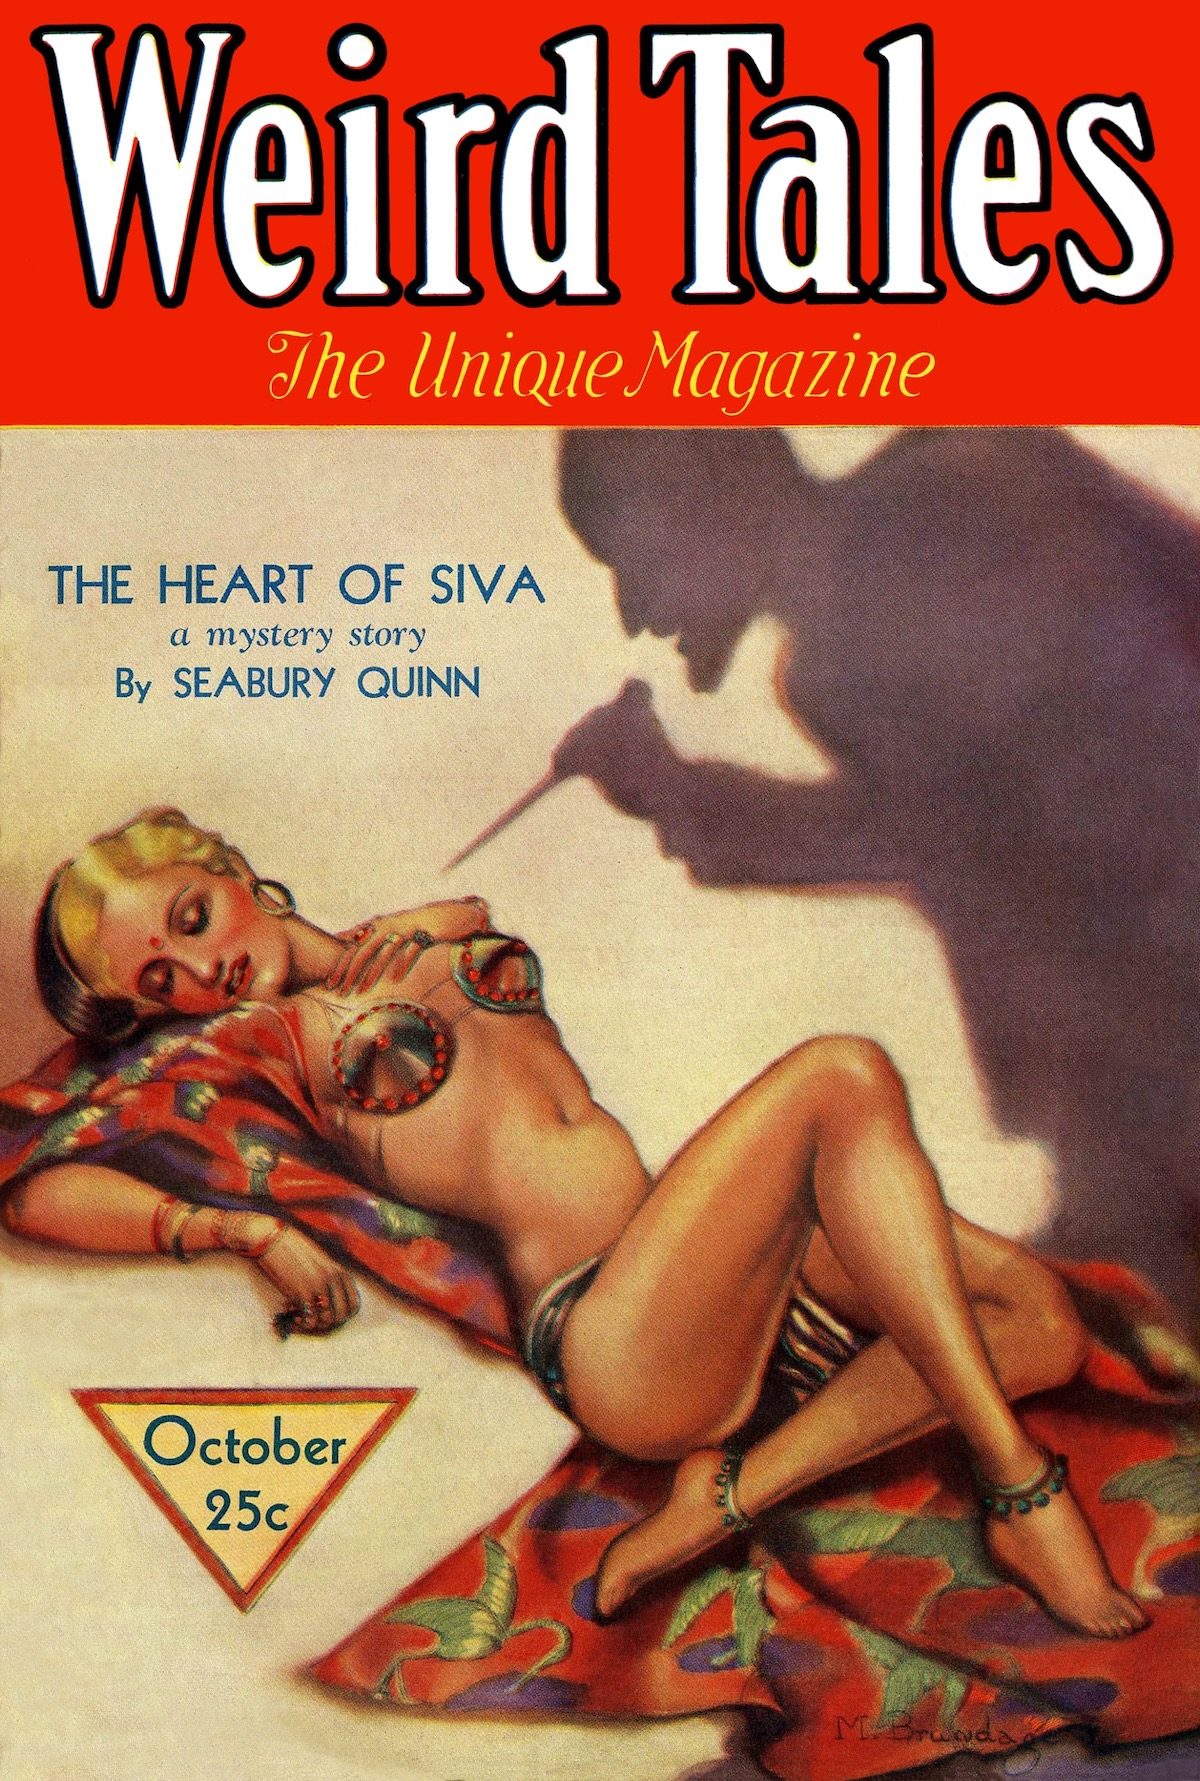 Weird Tales covers Margaret Brundage